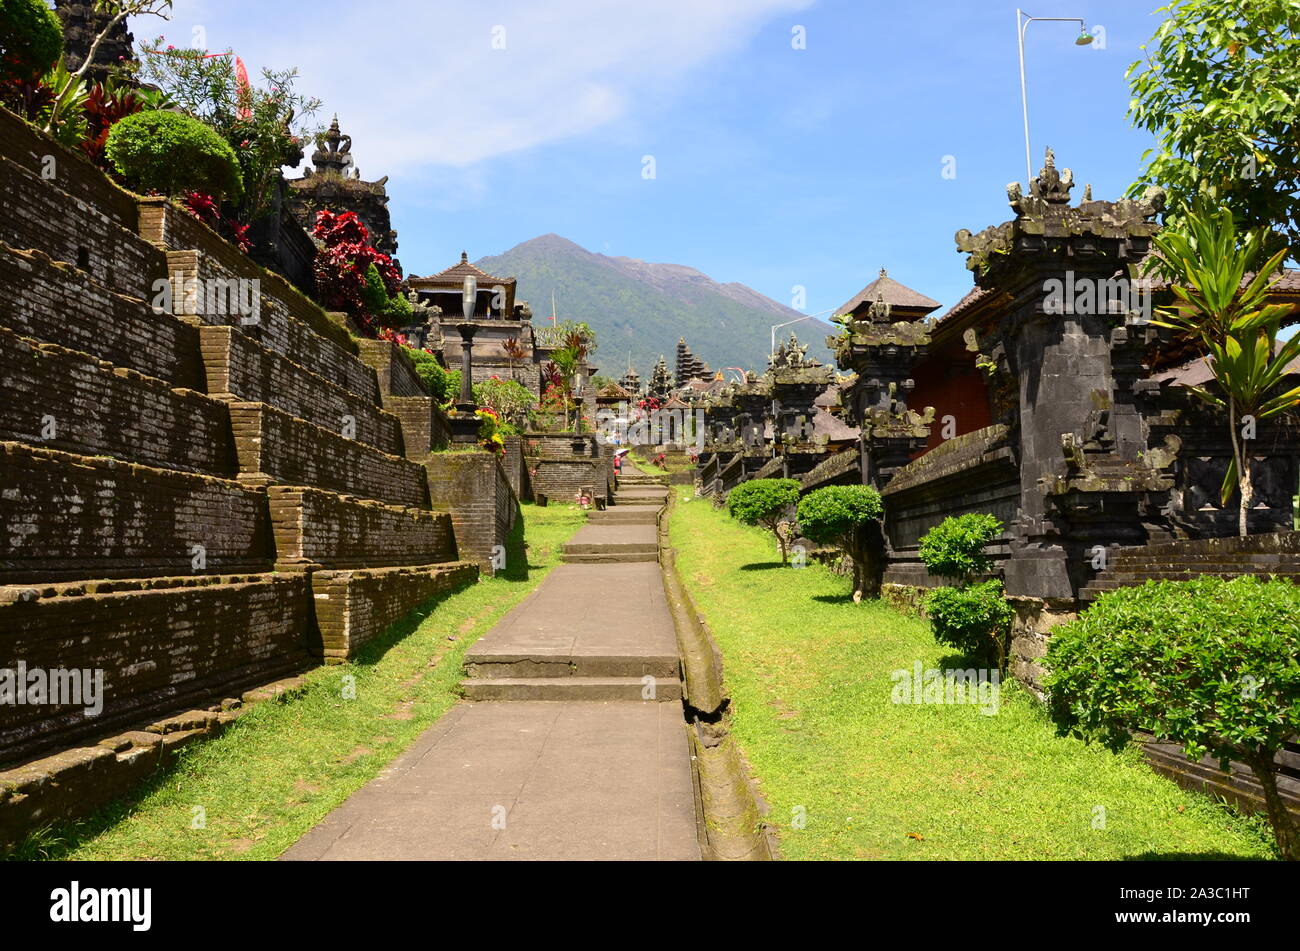 The view of the ancient temple in Asia Stock Photo